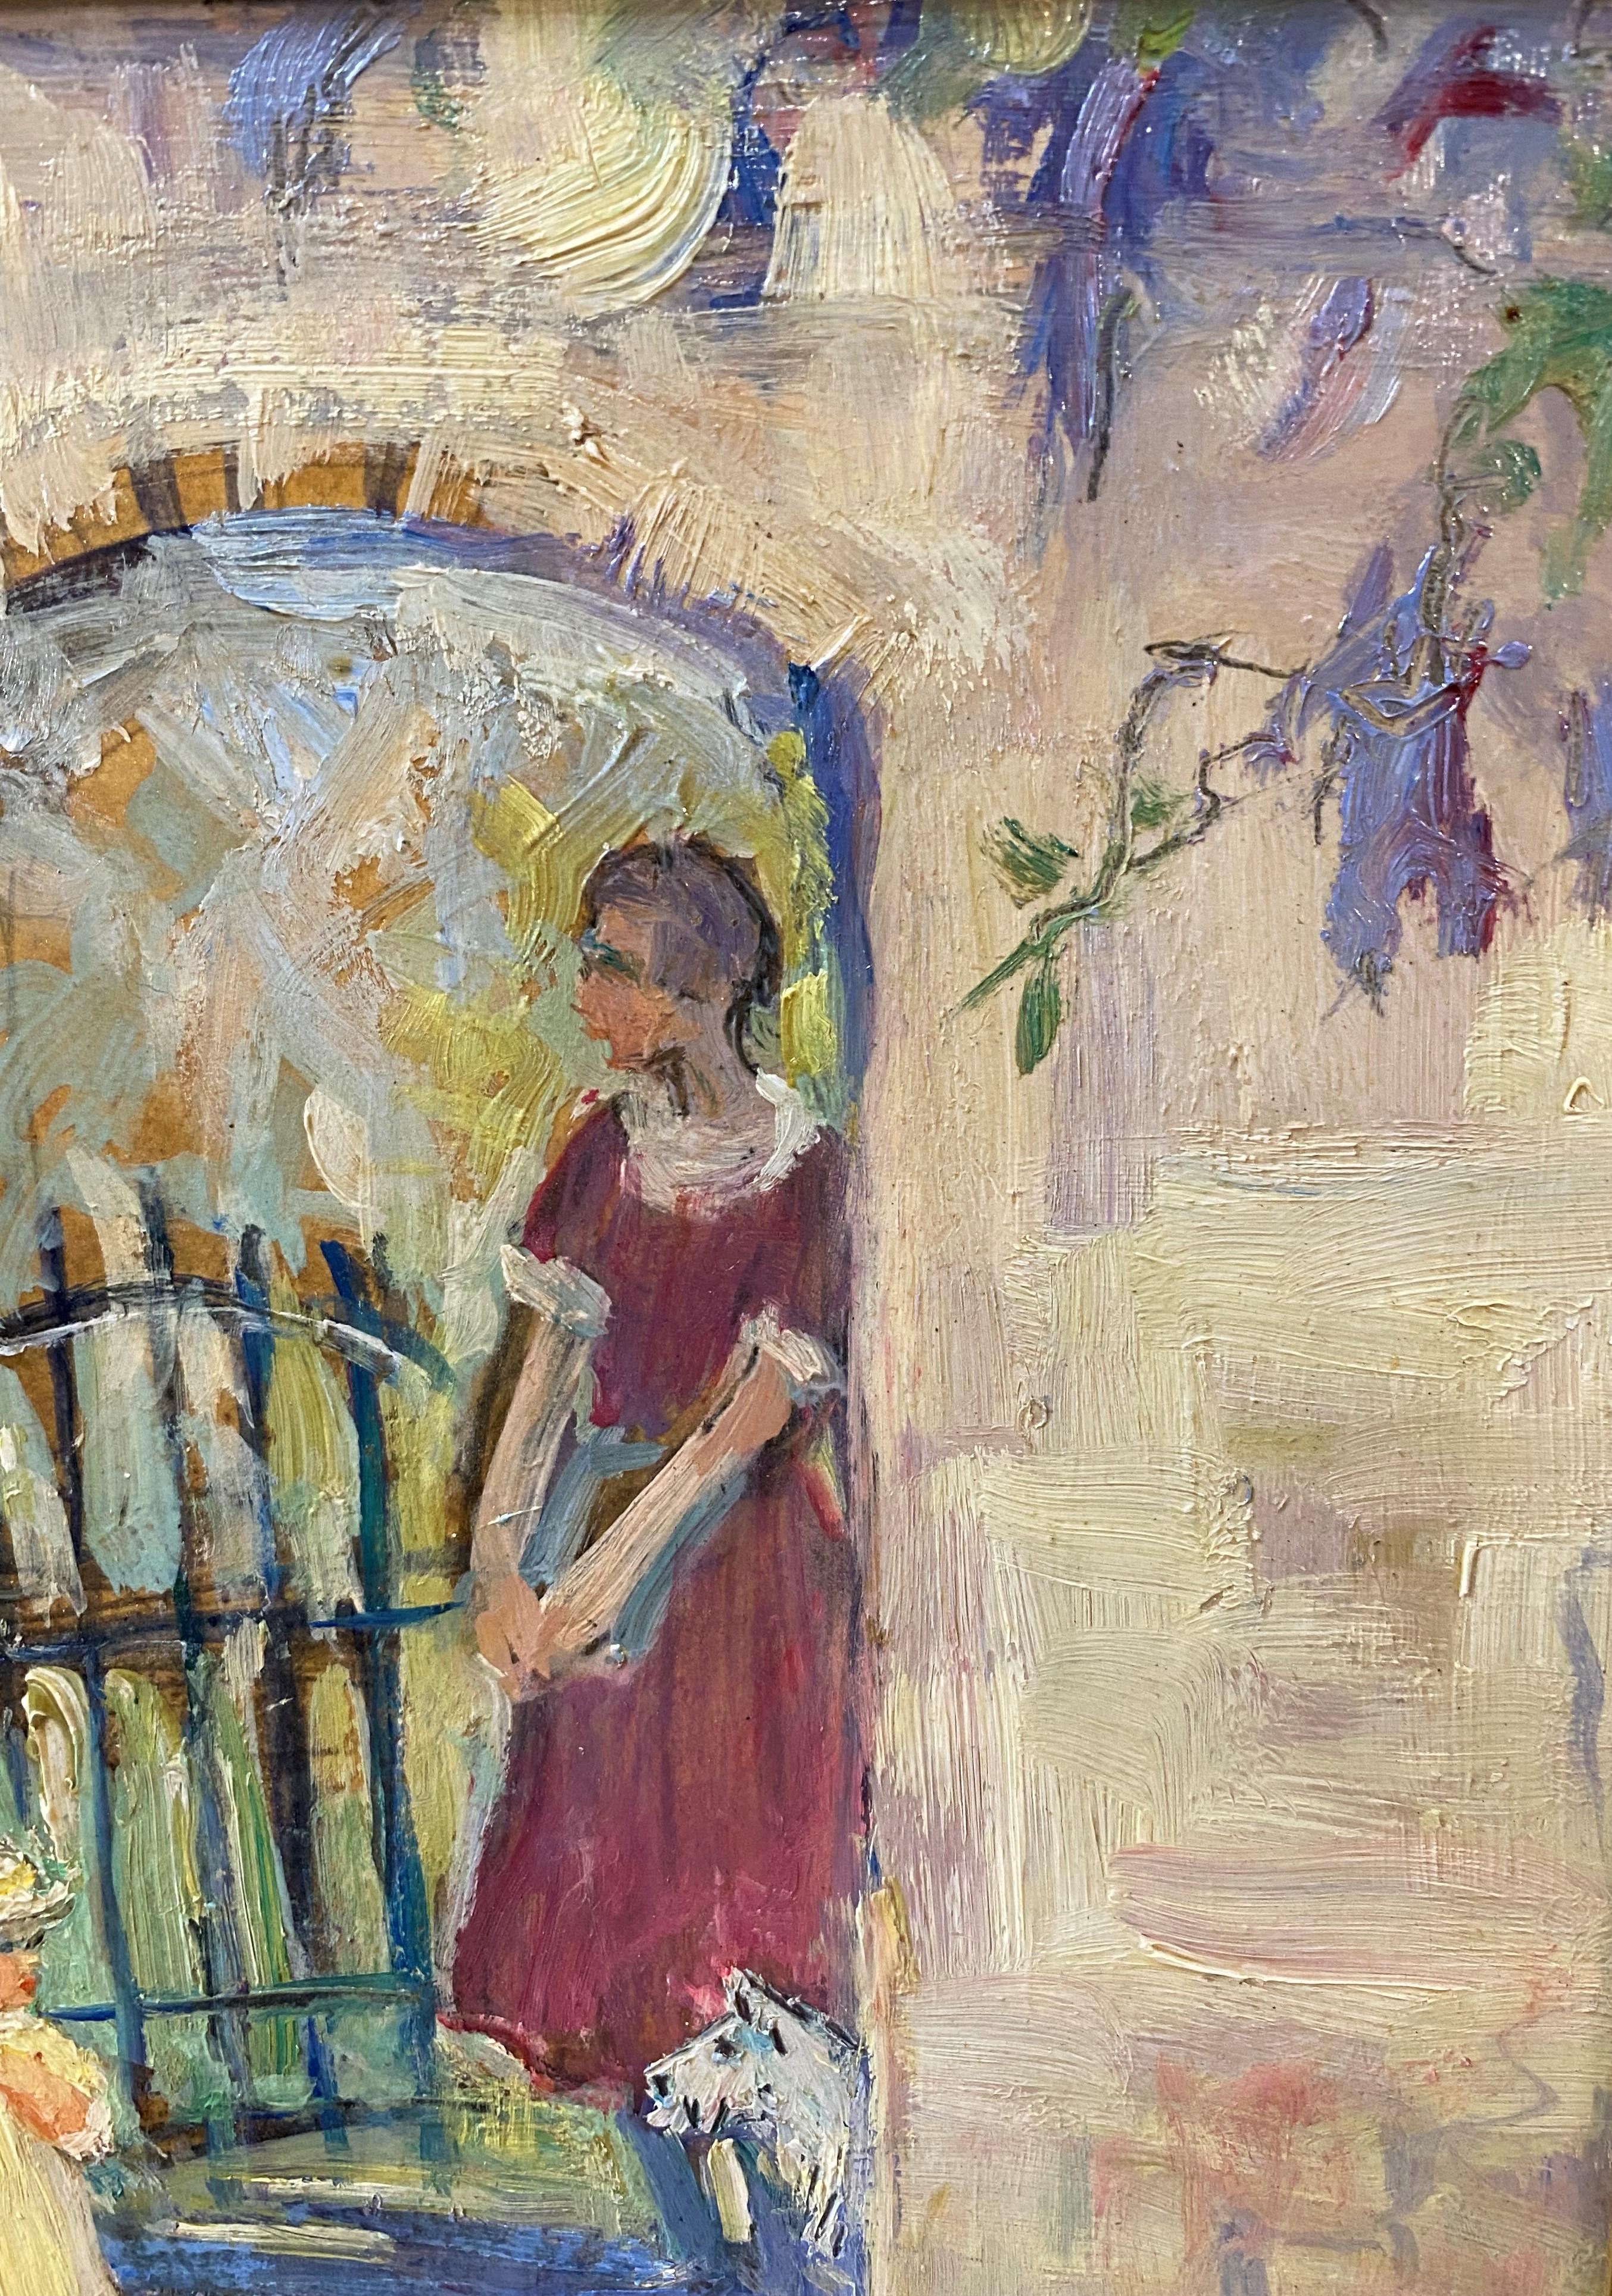 A splendid impressionist southern scene with figures in a doorway, possibly Charleston, South Carolina by American artist Rachel V. Hartley (1884-1955). Hartley was born in New York City, daughter of sculptor Jonathon Scott Hartley and Helen Inness